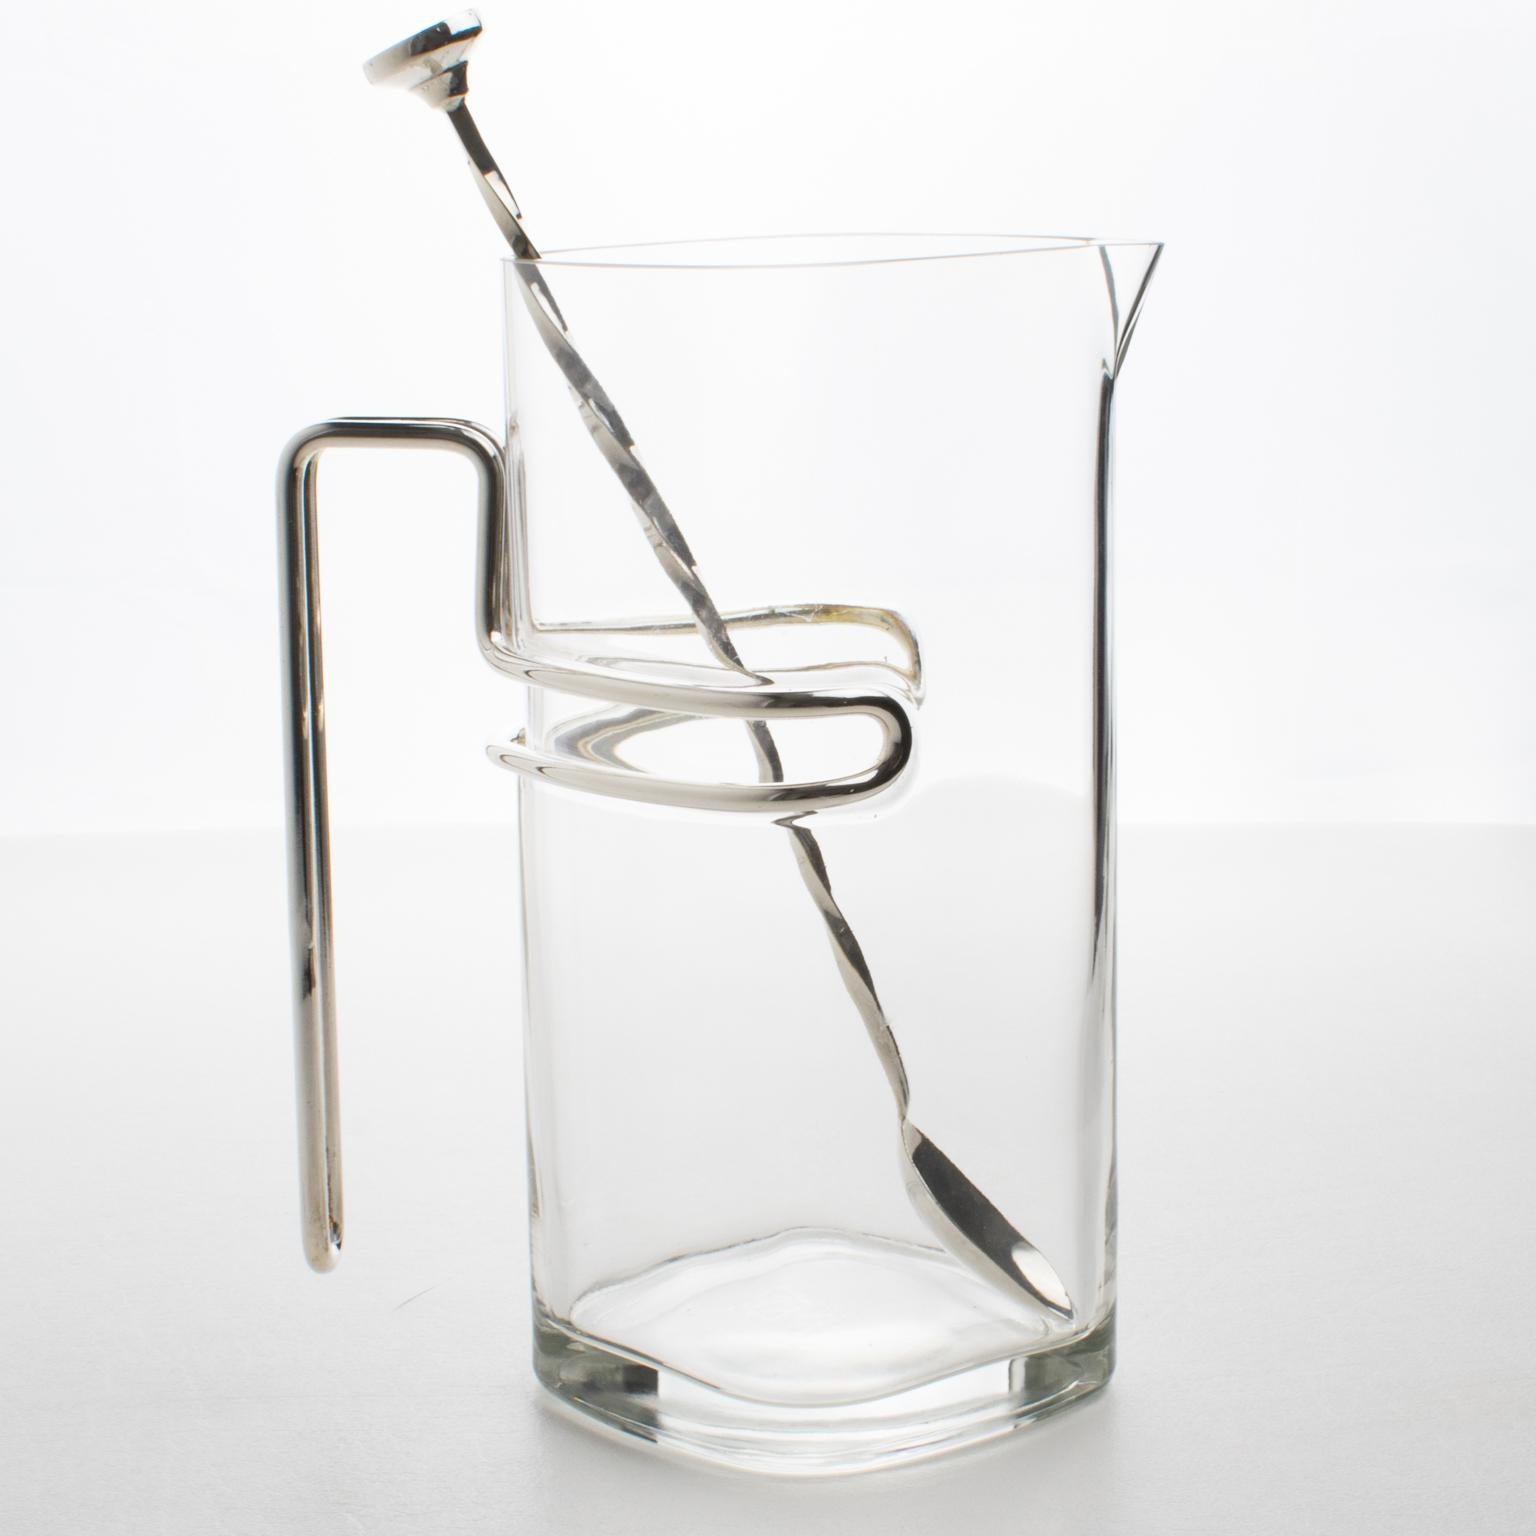 An elegant streamlined barware set designed by Luigi Bormioli for its Light and Music Collection in the 1980s. Sleek and modernist flair, the square-shaped pitcher has a thick gauge silver plated wire wrapped around the container to form a